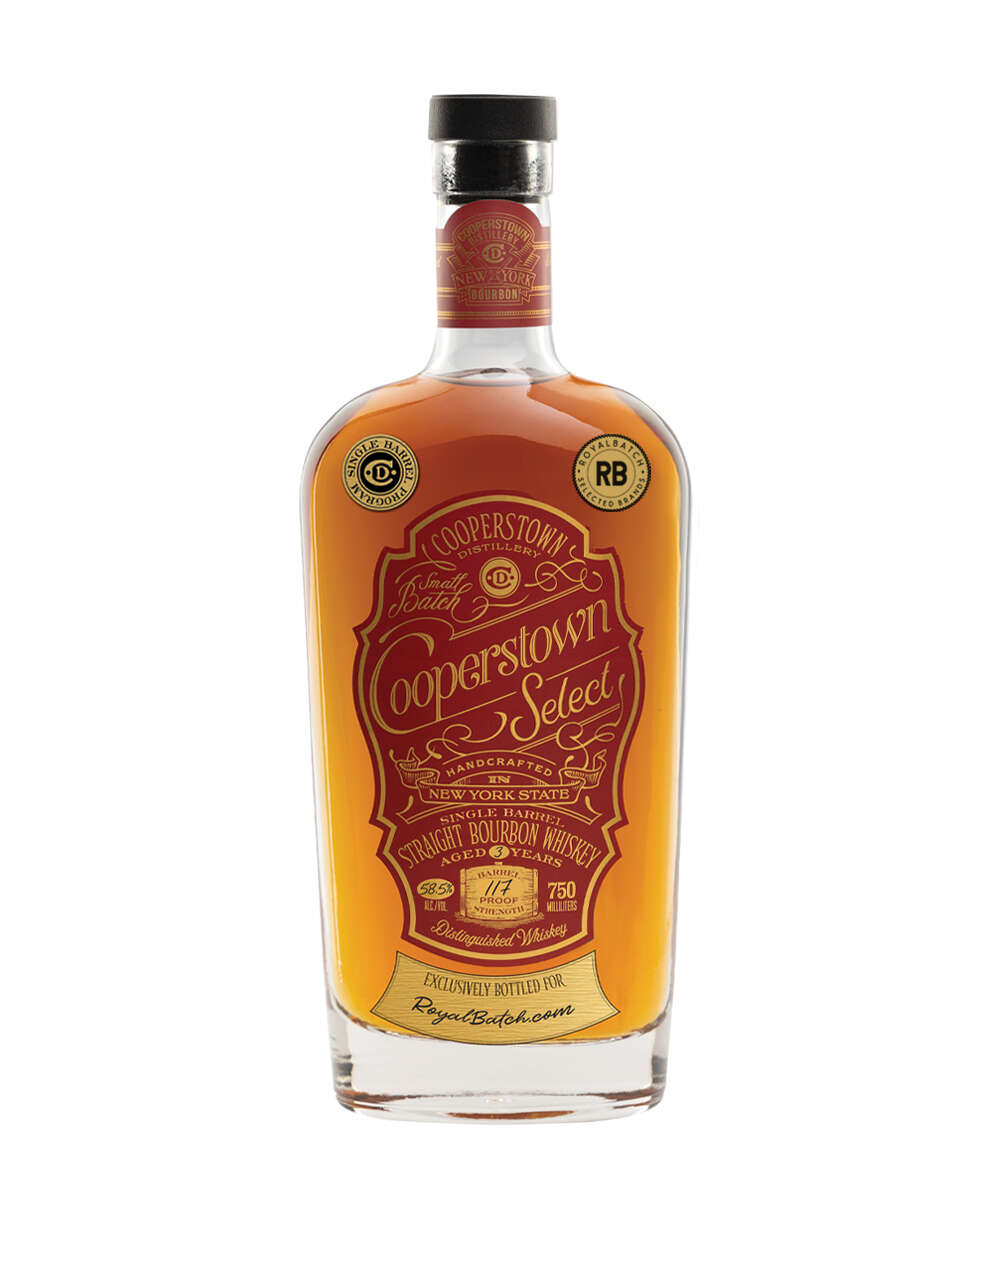 Cooperstown Select Bourbon Whiskey 117 Proof Exclusively Crafted for ROYAL BATCH